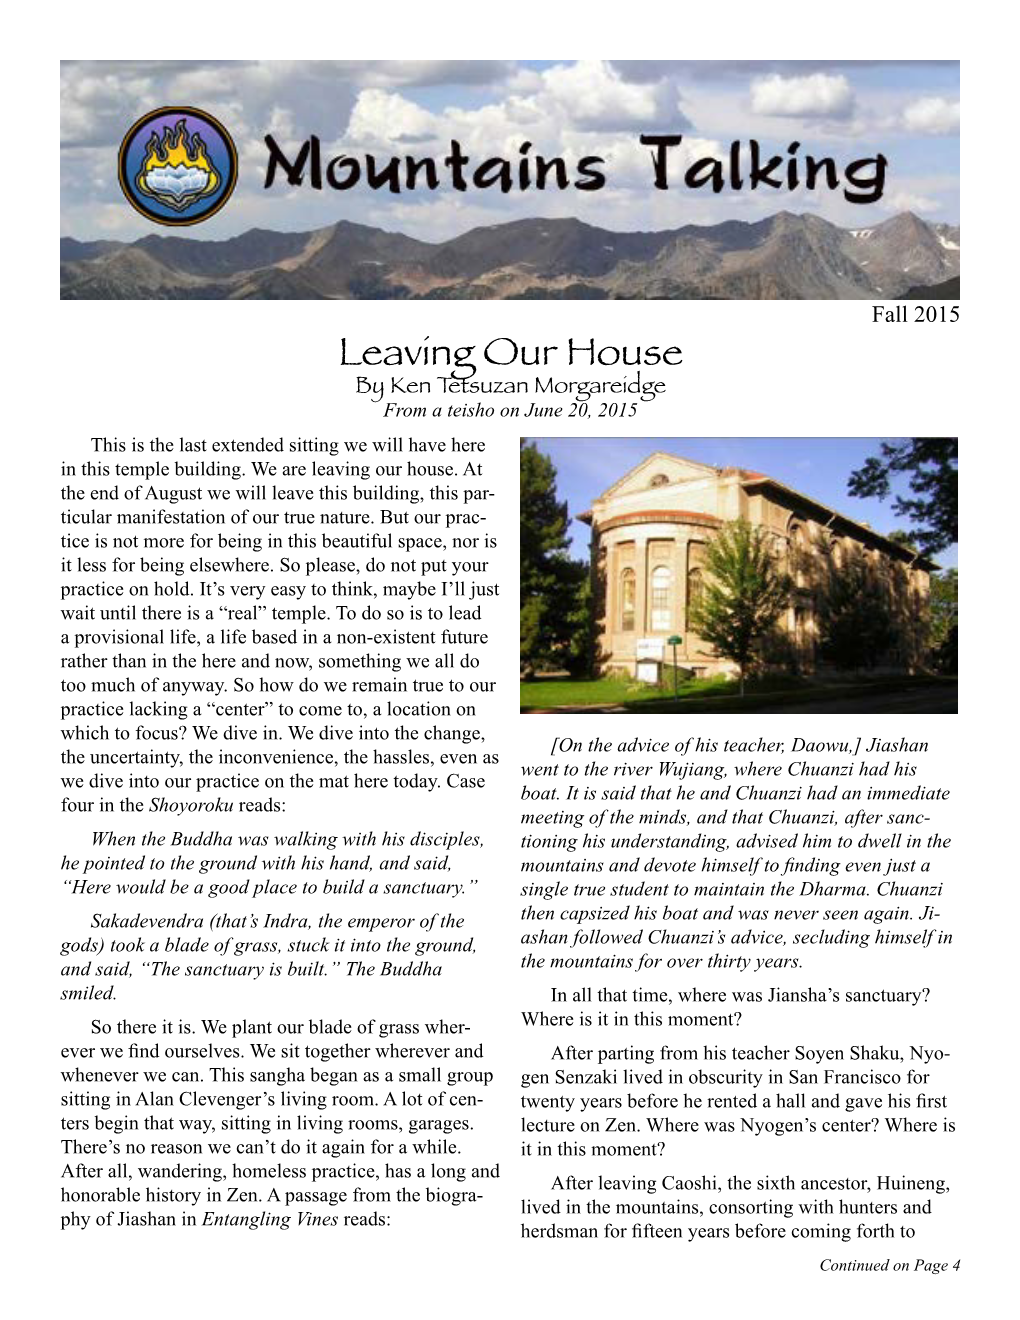 Leaving Our House by Ken Tetsuzan Morgareidge from a Teisho on June 20, 2015 This Is the Last Extended Sitting We Will Have Here in This Temple Building